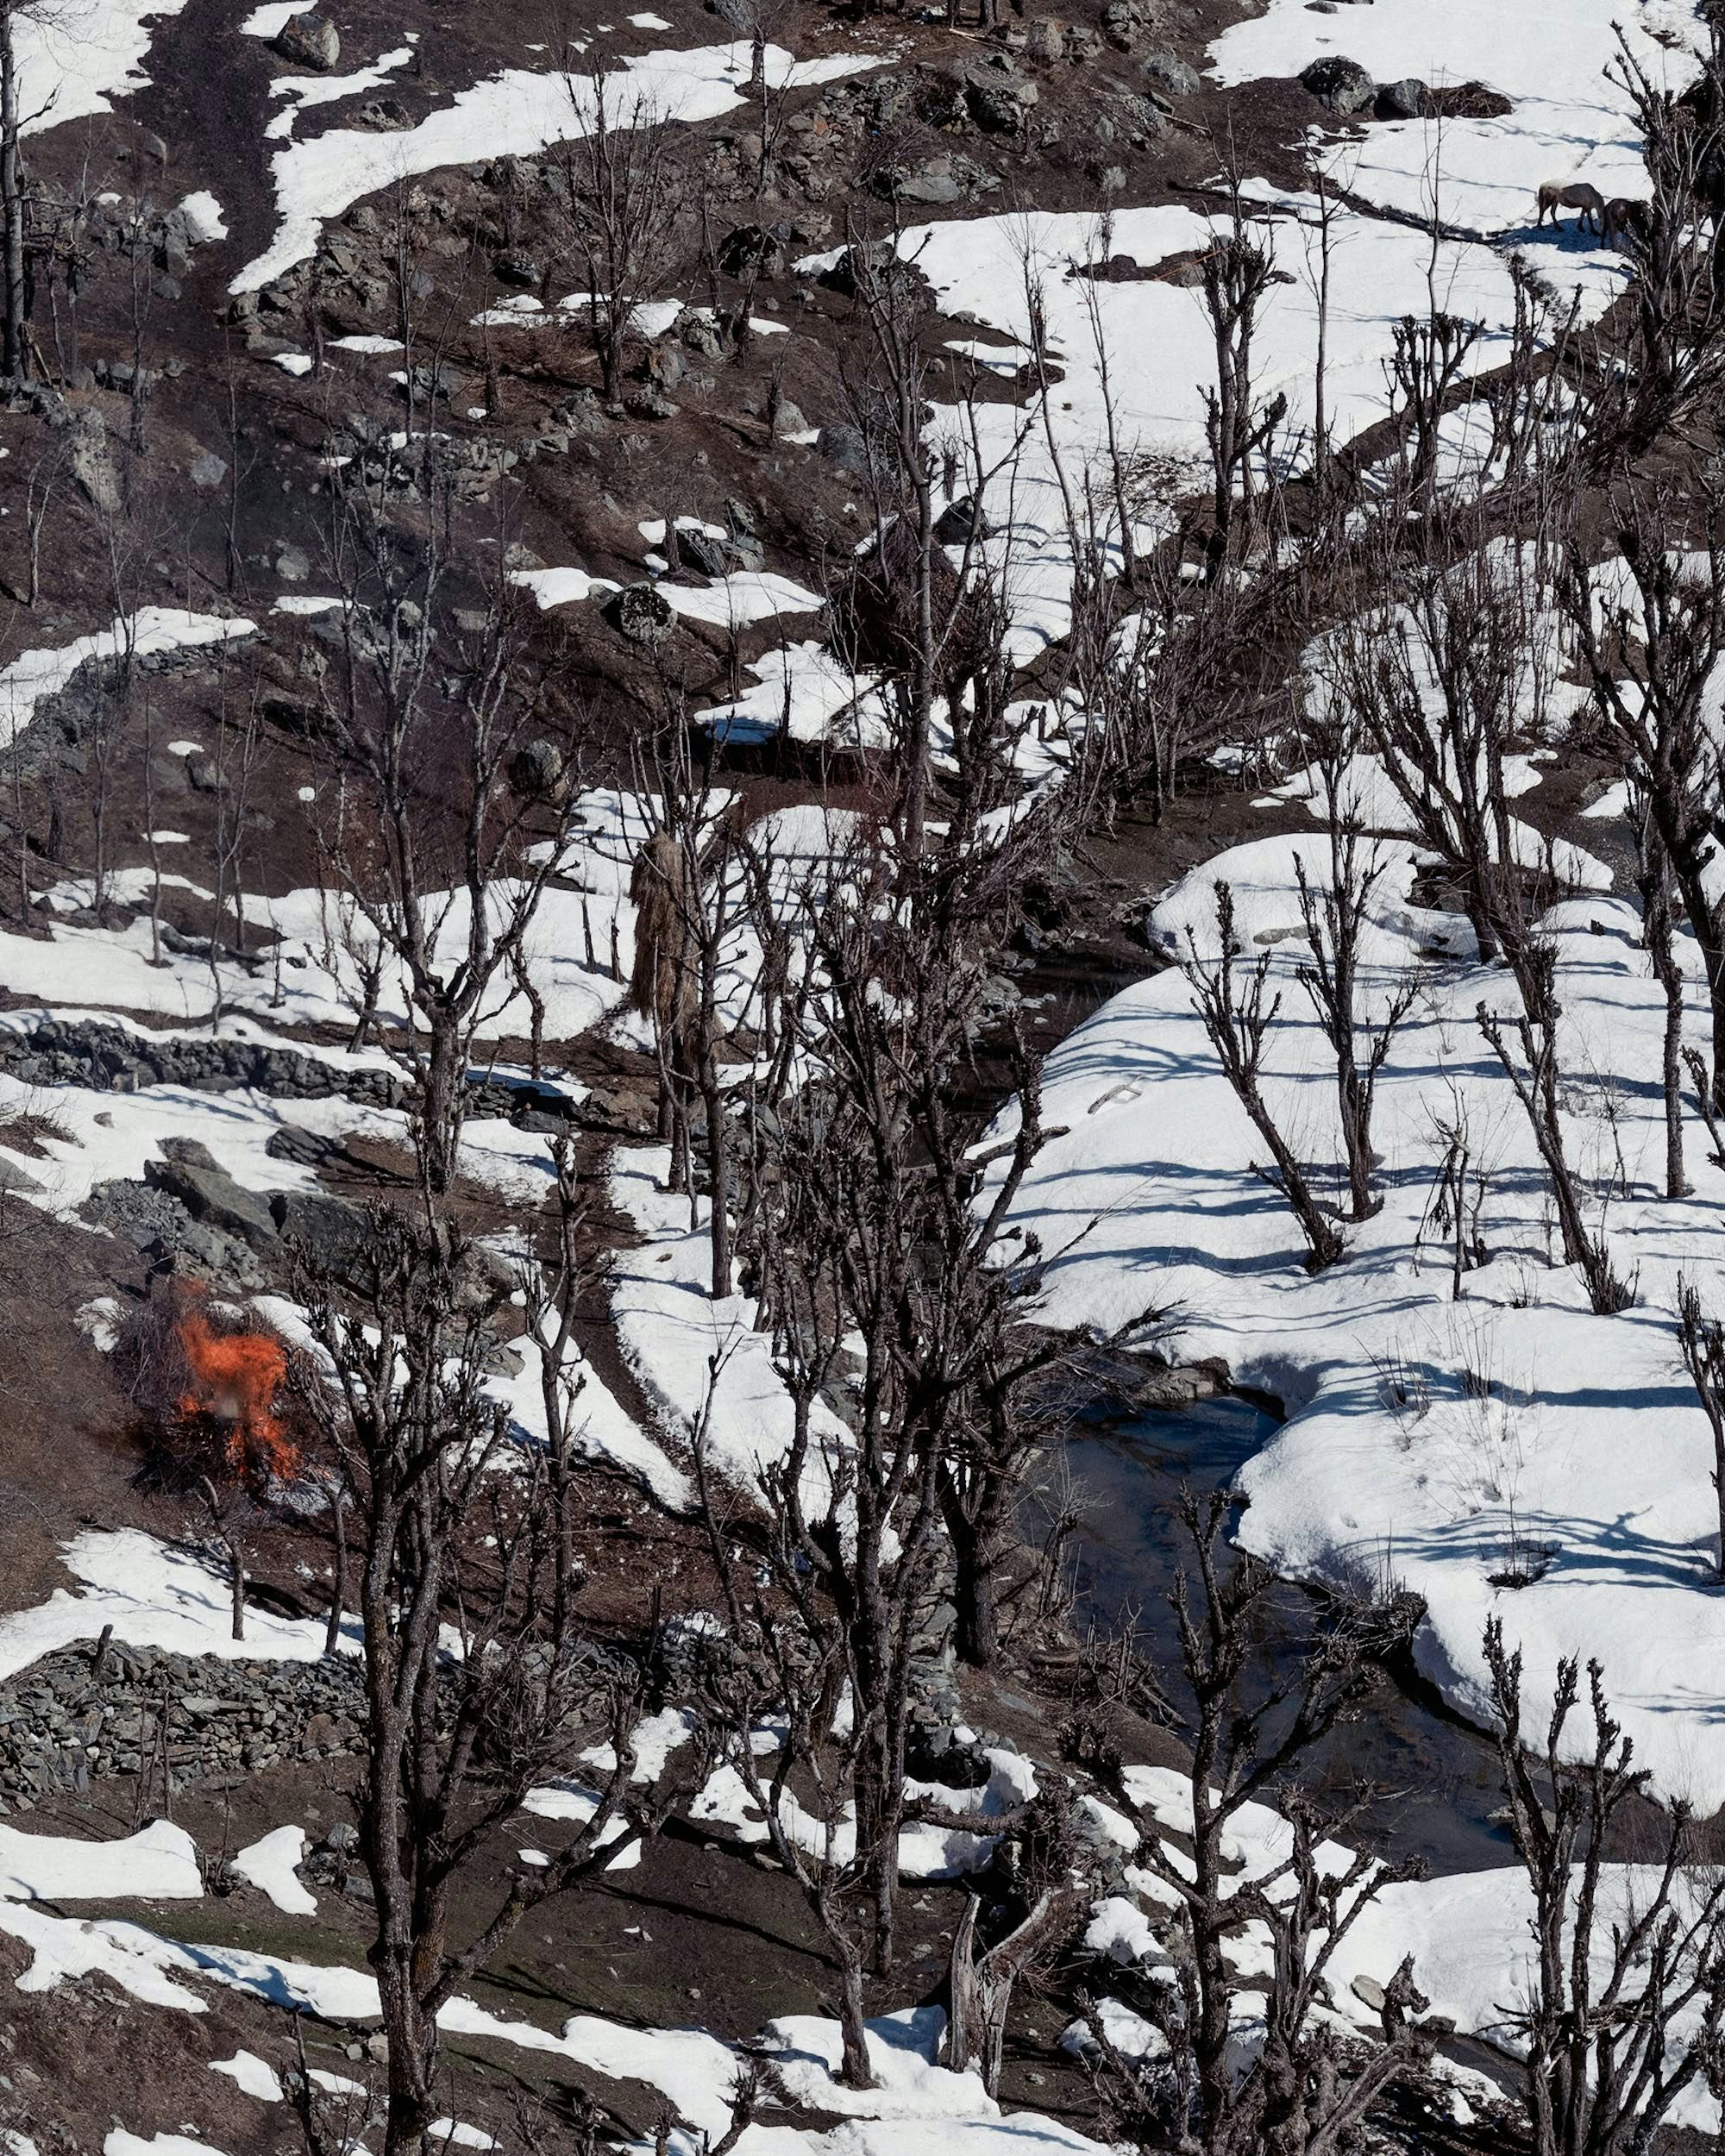 Close-up of a snowy hill side with bare trees and a wildfire in Gulmag, Kashmir © Aaryan Sinha